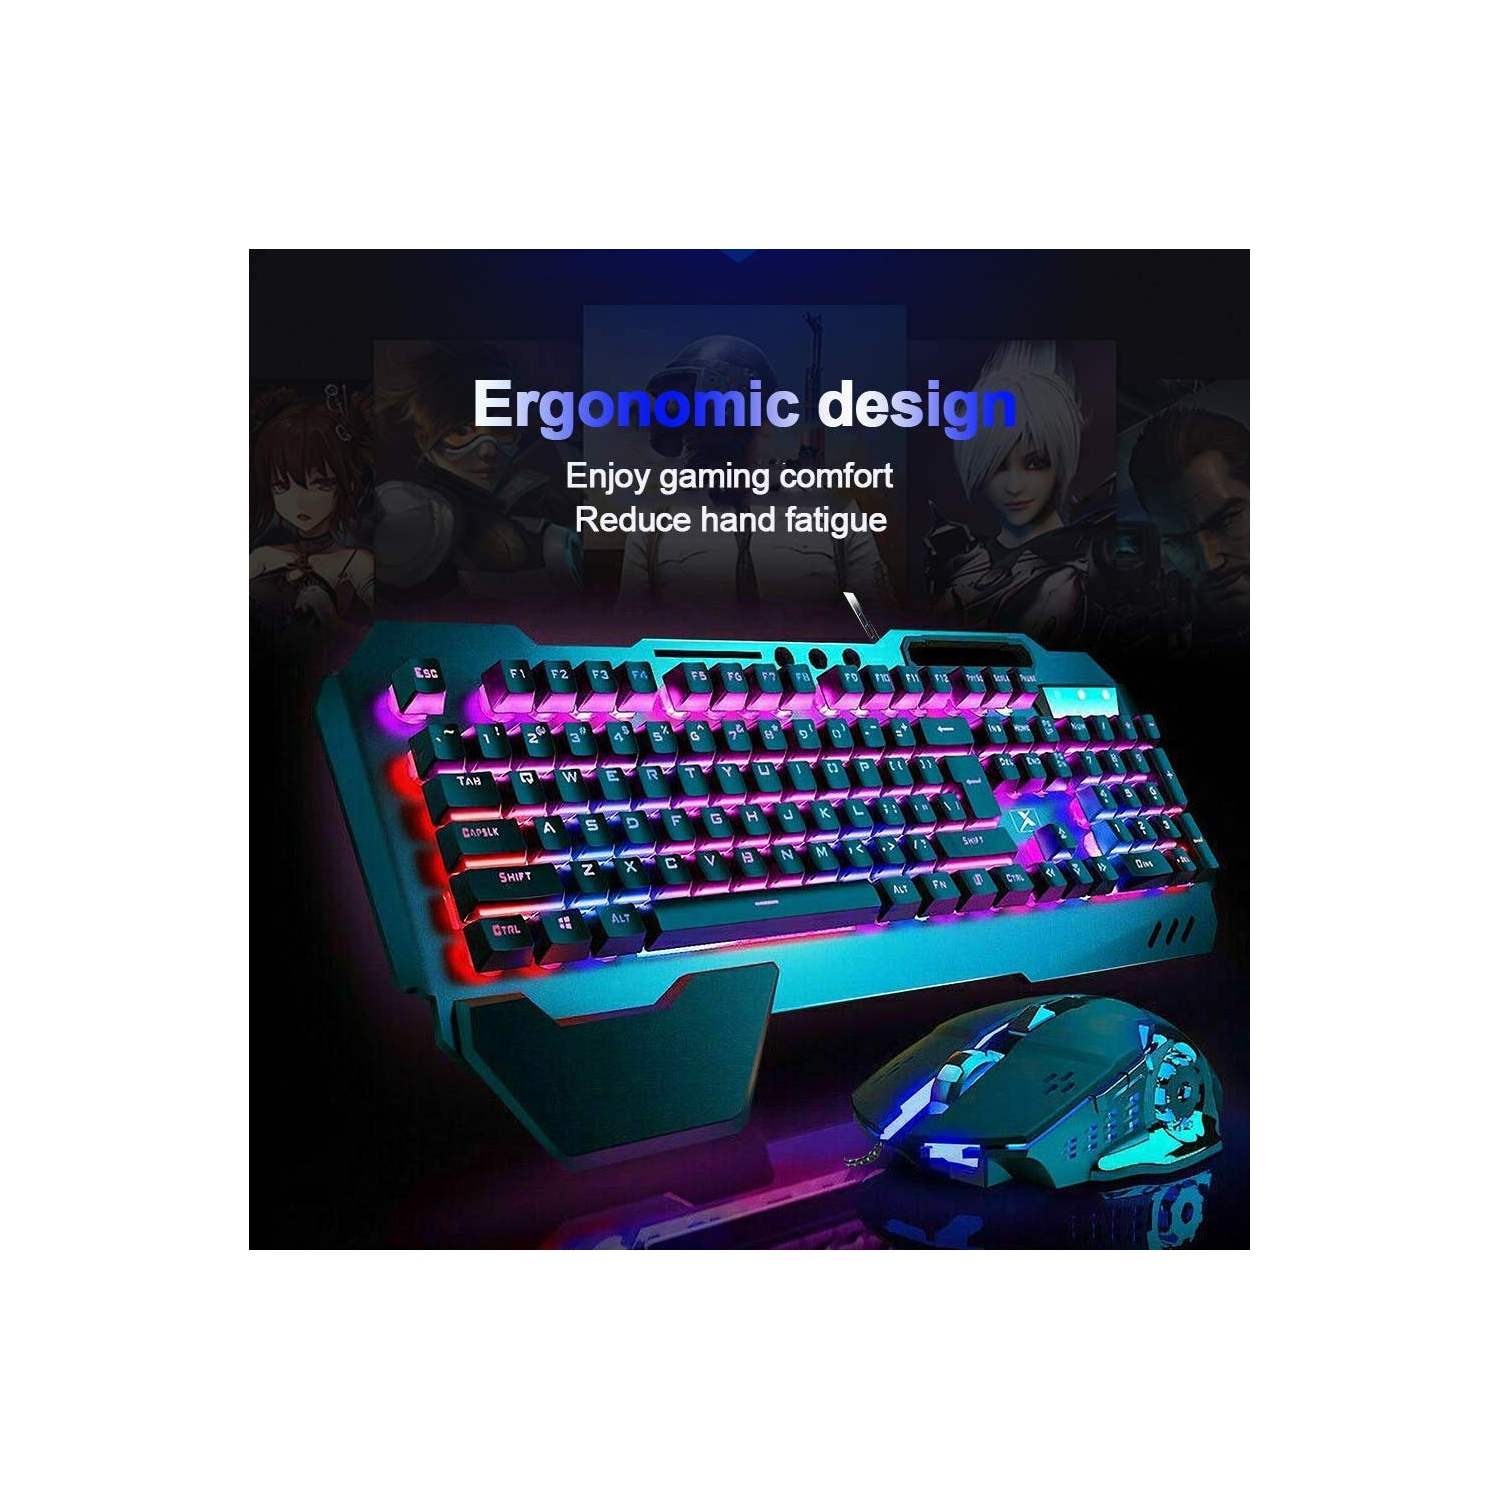 Keyboard and Mouse Kit Set Wired RGB 104 Keys Caps Mechanical Feel Gaming  Keyboard and Mouse Combo PC Gamer Set Up Game Laptop - AliExpress